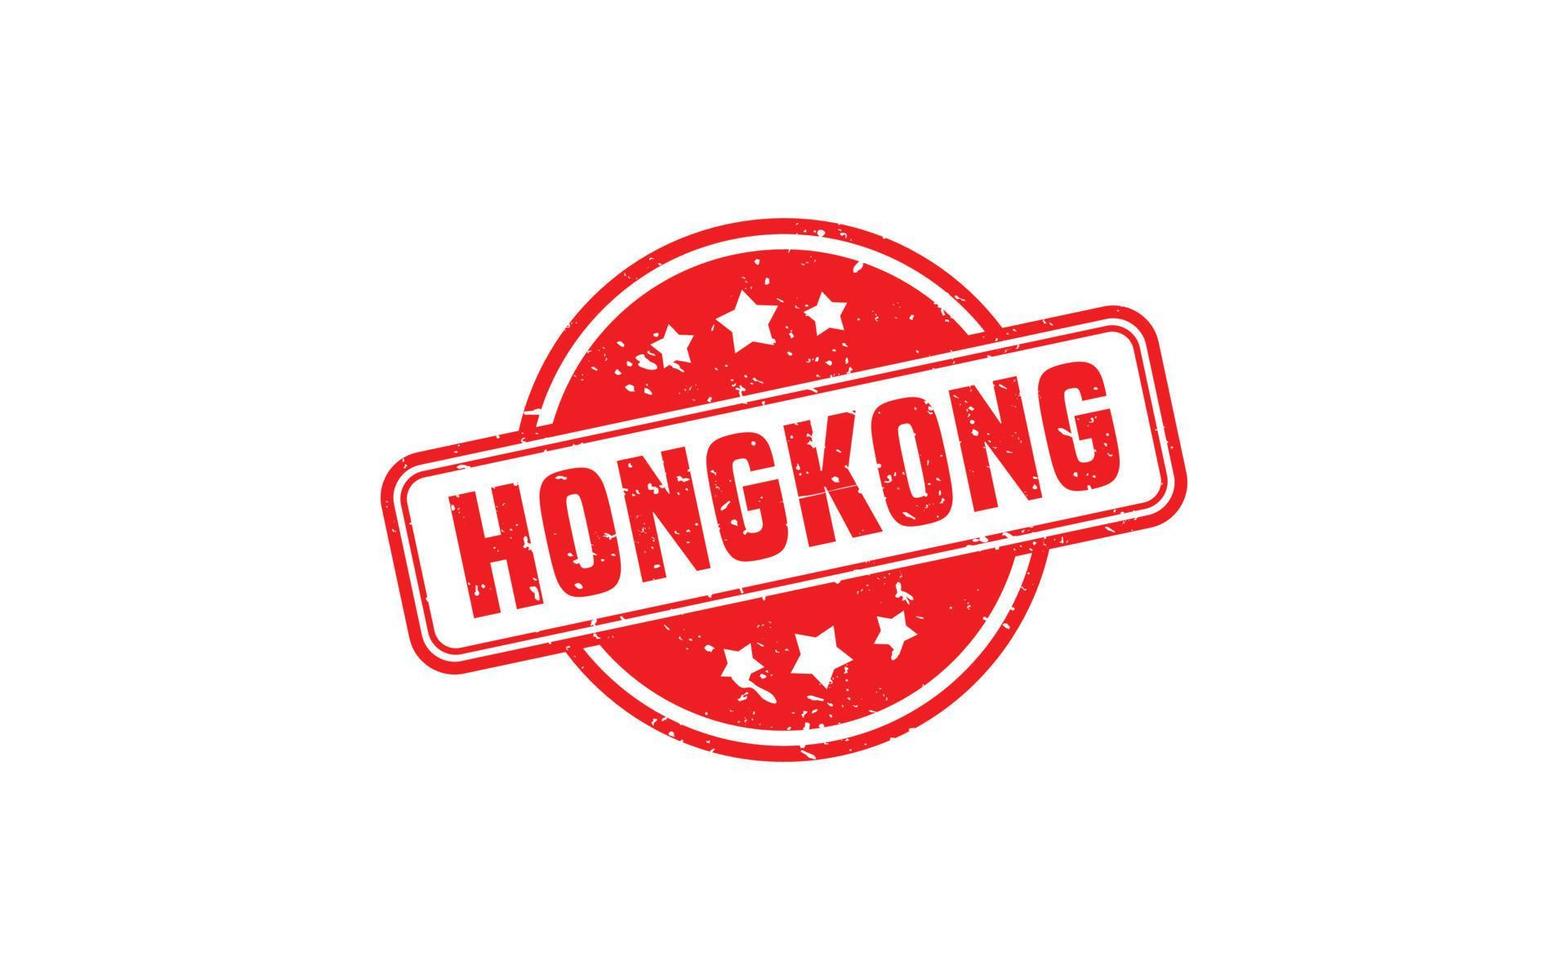 HONGKONG stamp rubber with grunge style on white background vector